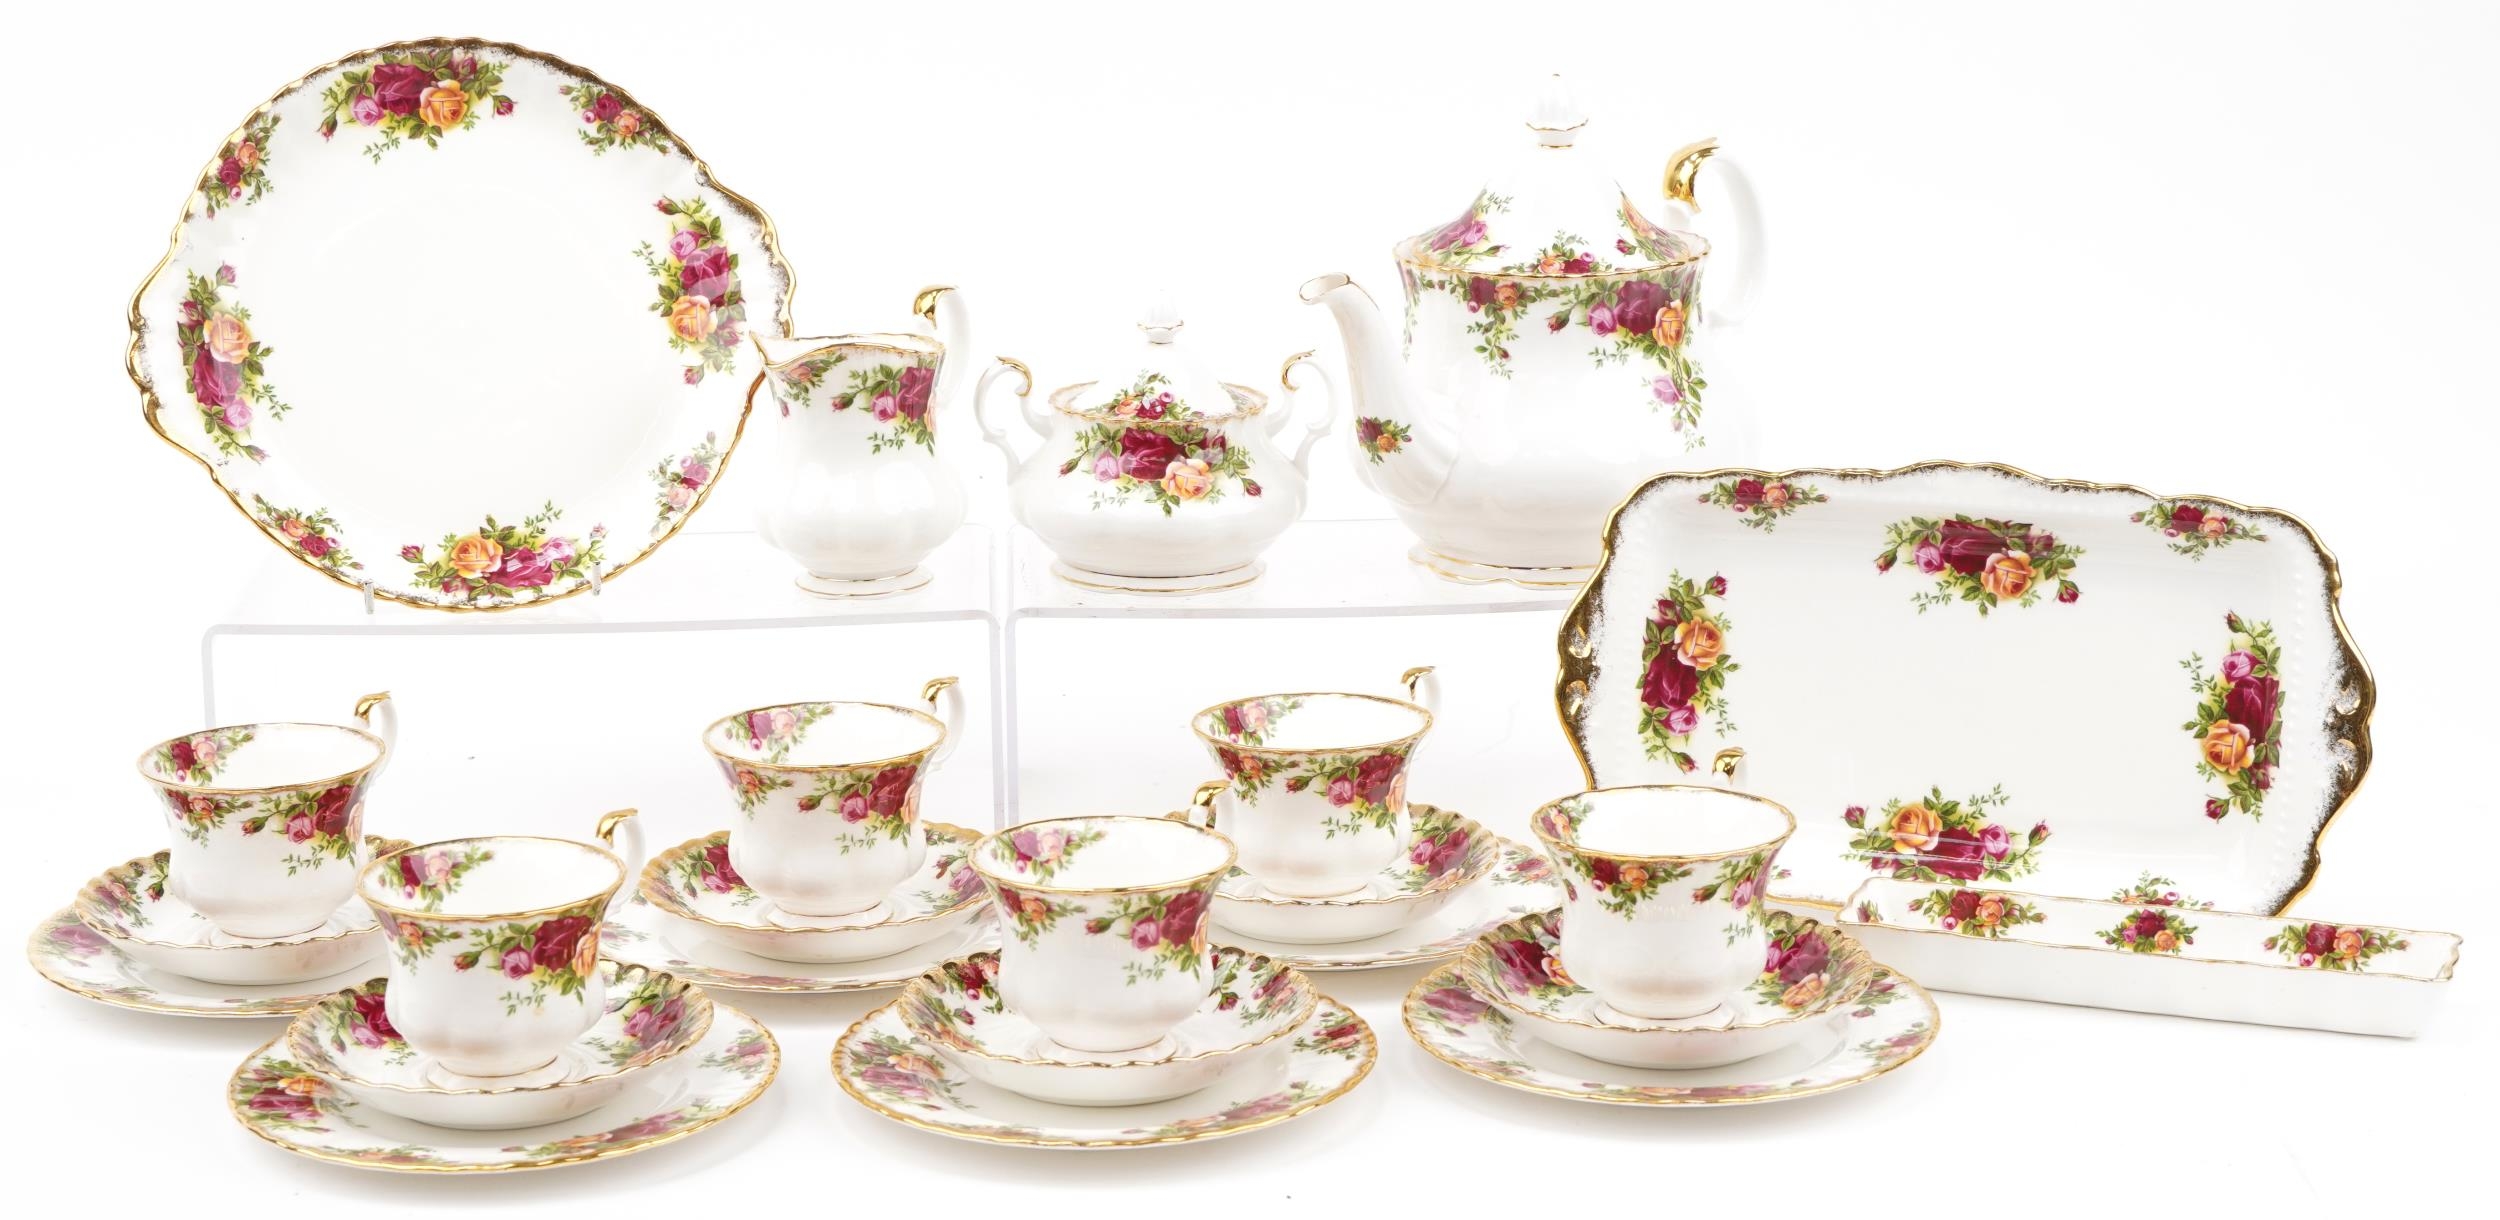 Royal Albert Old Country Roses six place tea service with teapot, lidded sugar bowl and milk jug,